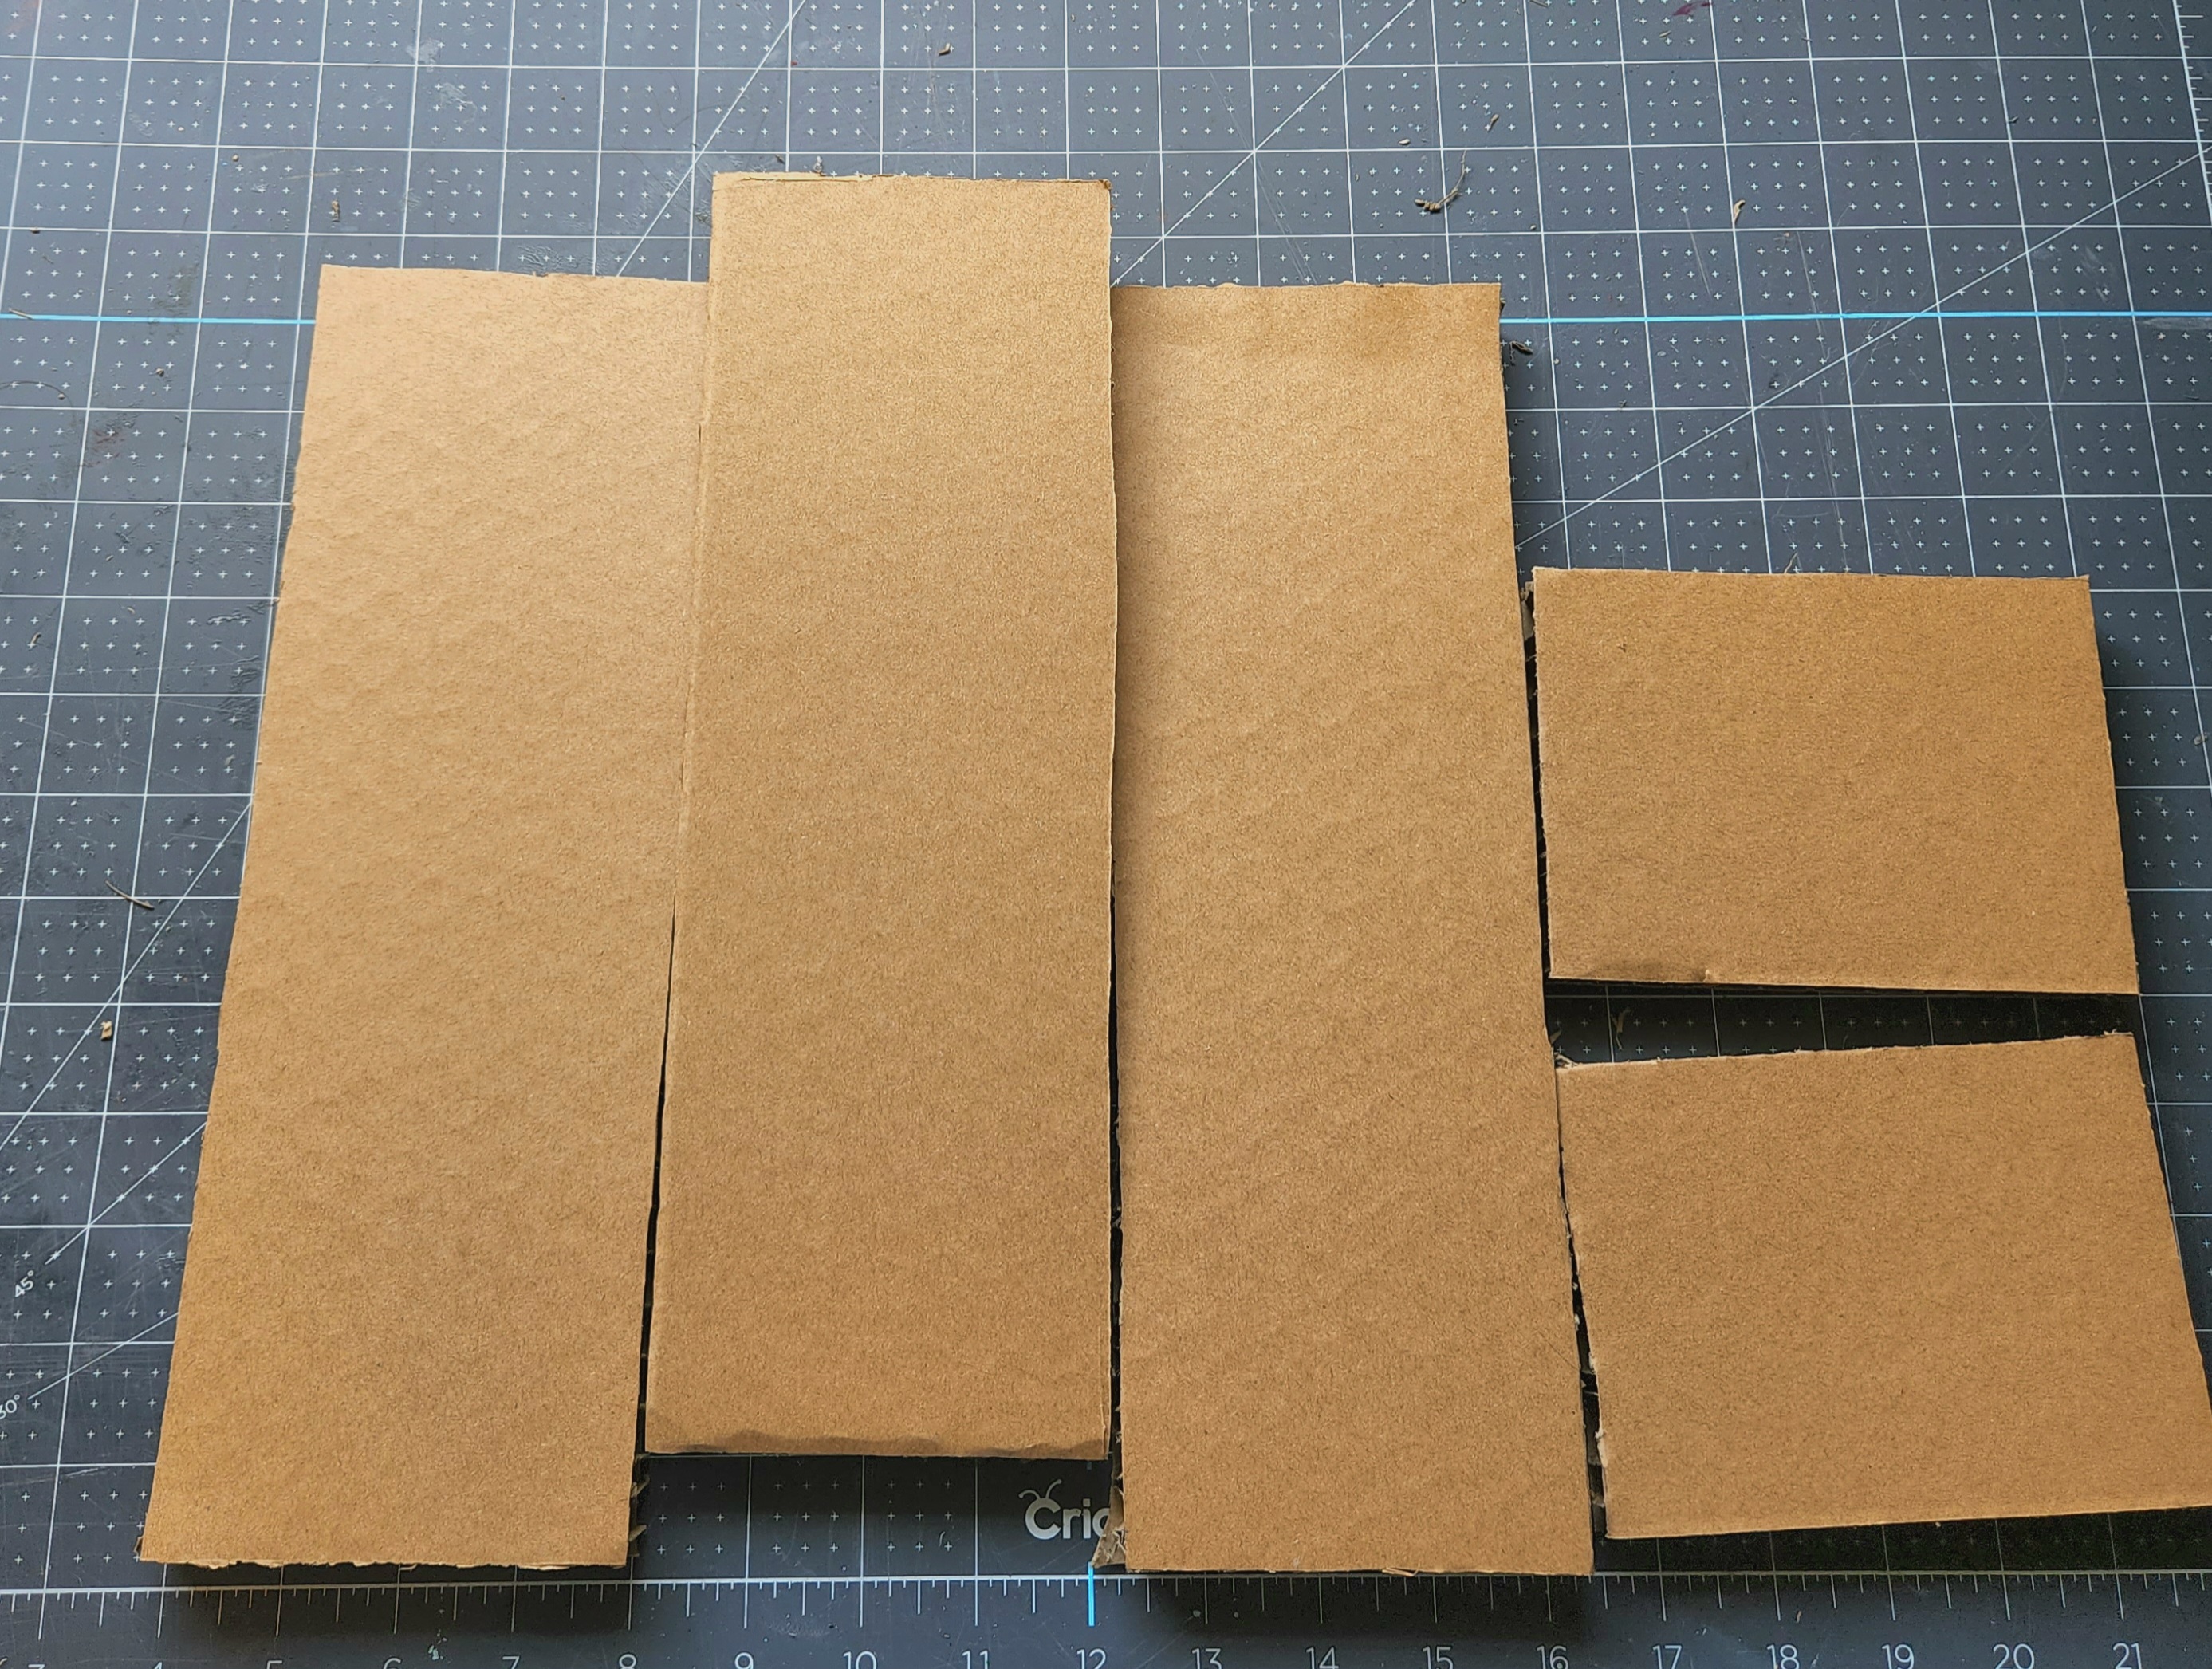 Five pieces of cardboard cut out that will form the DIY wood planter box/coastal centerpiece.